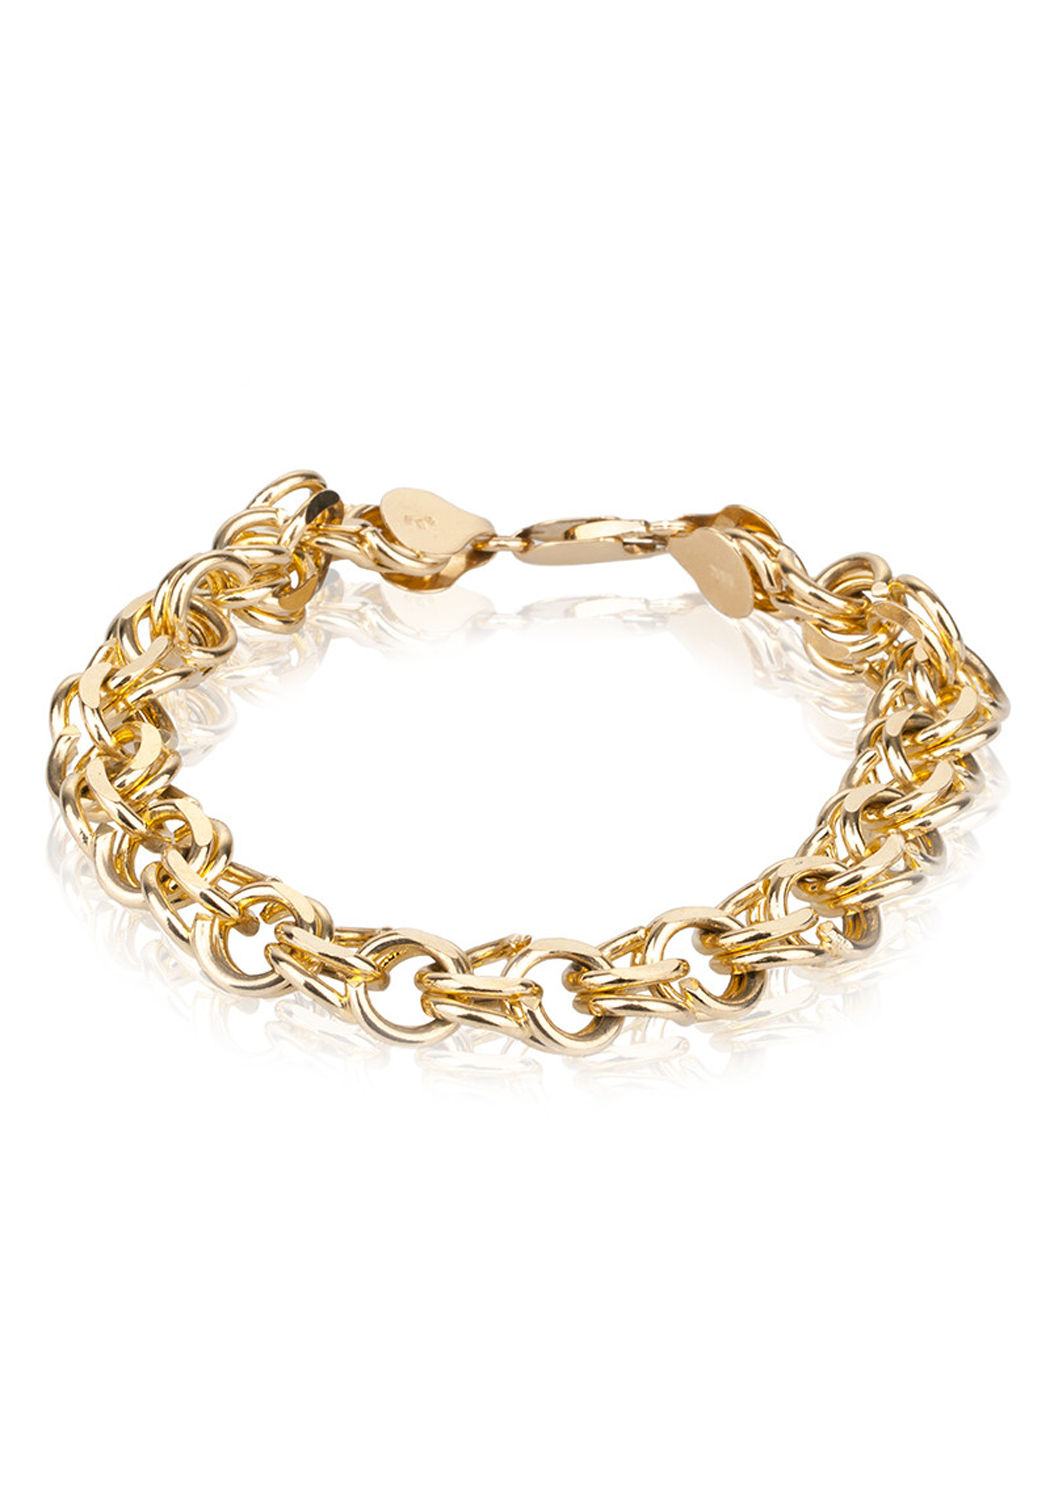 Buy Three Layered Gold Plated Link Chain Bracelet Online At Best Price @  Tata CLiQ